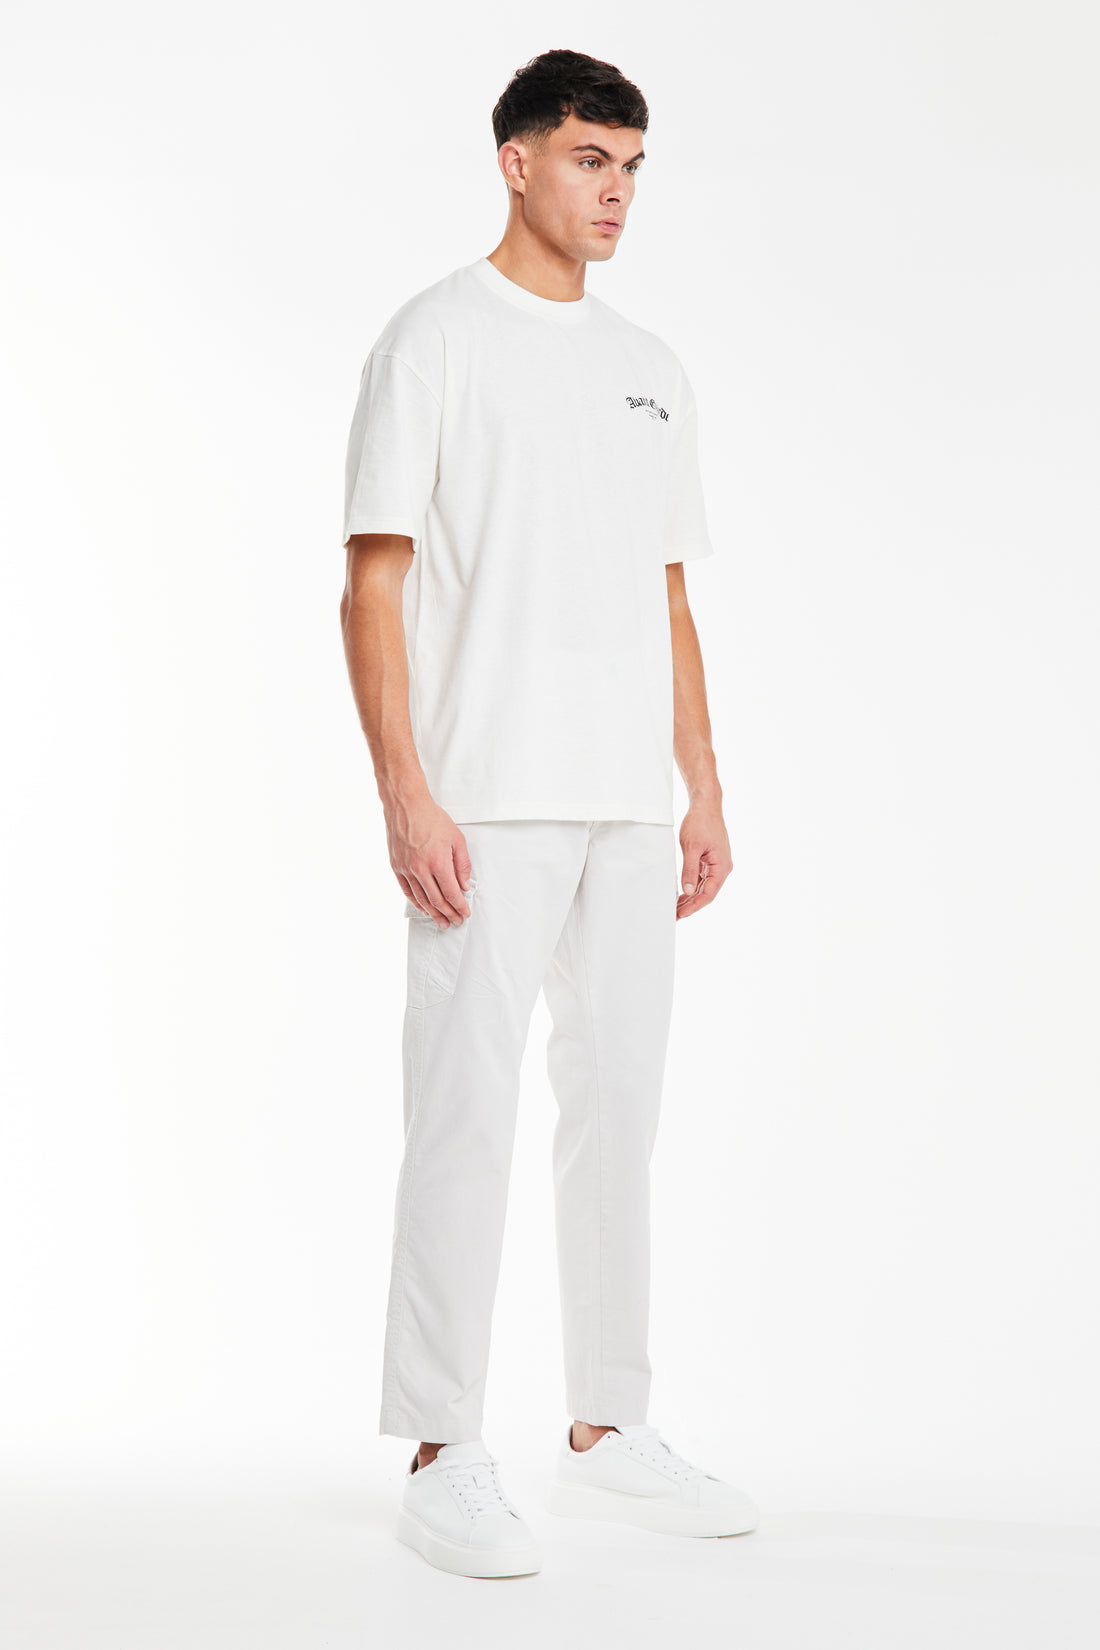 Off-white t shirt styled with pants and trainers